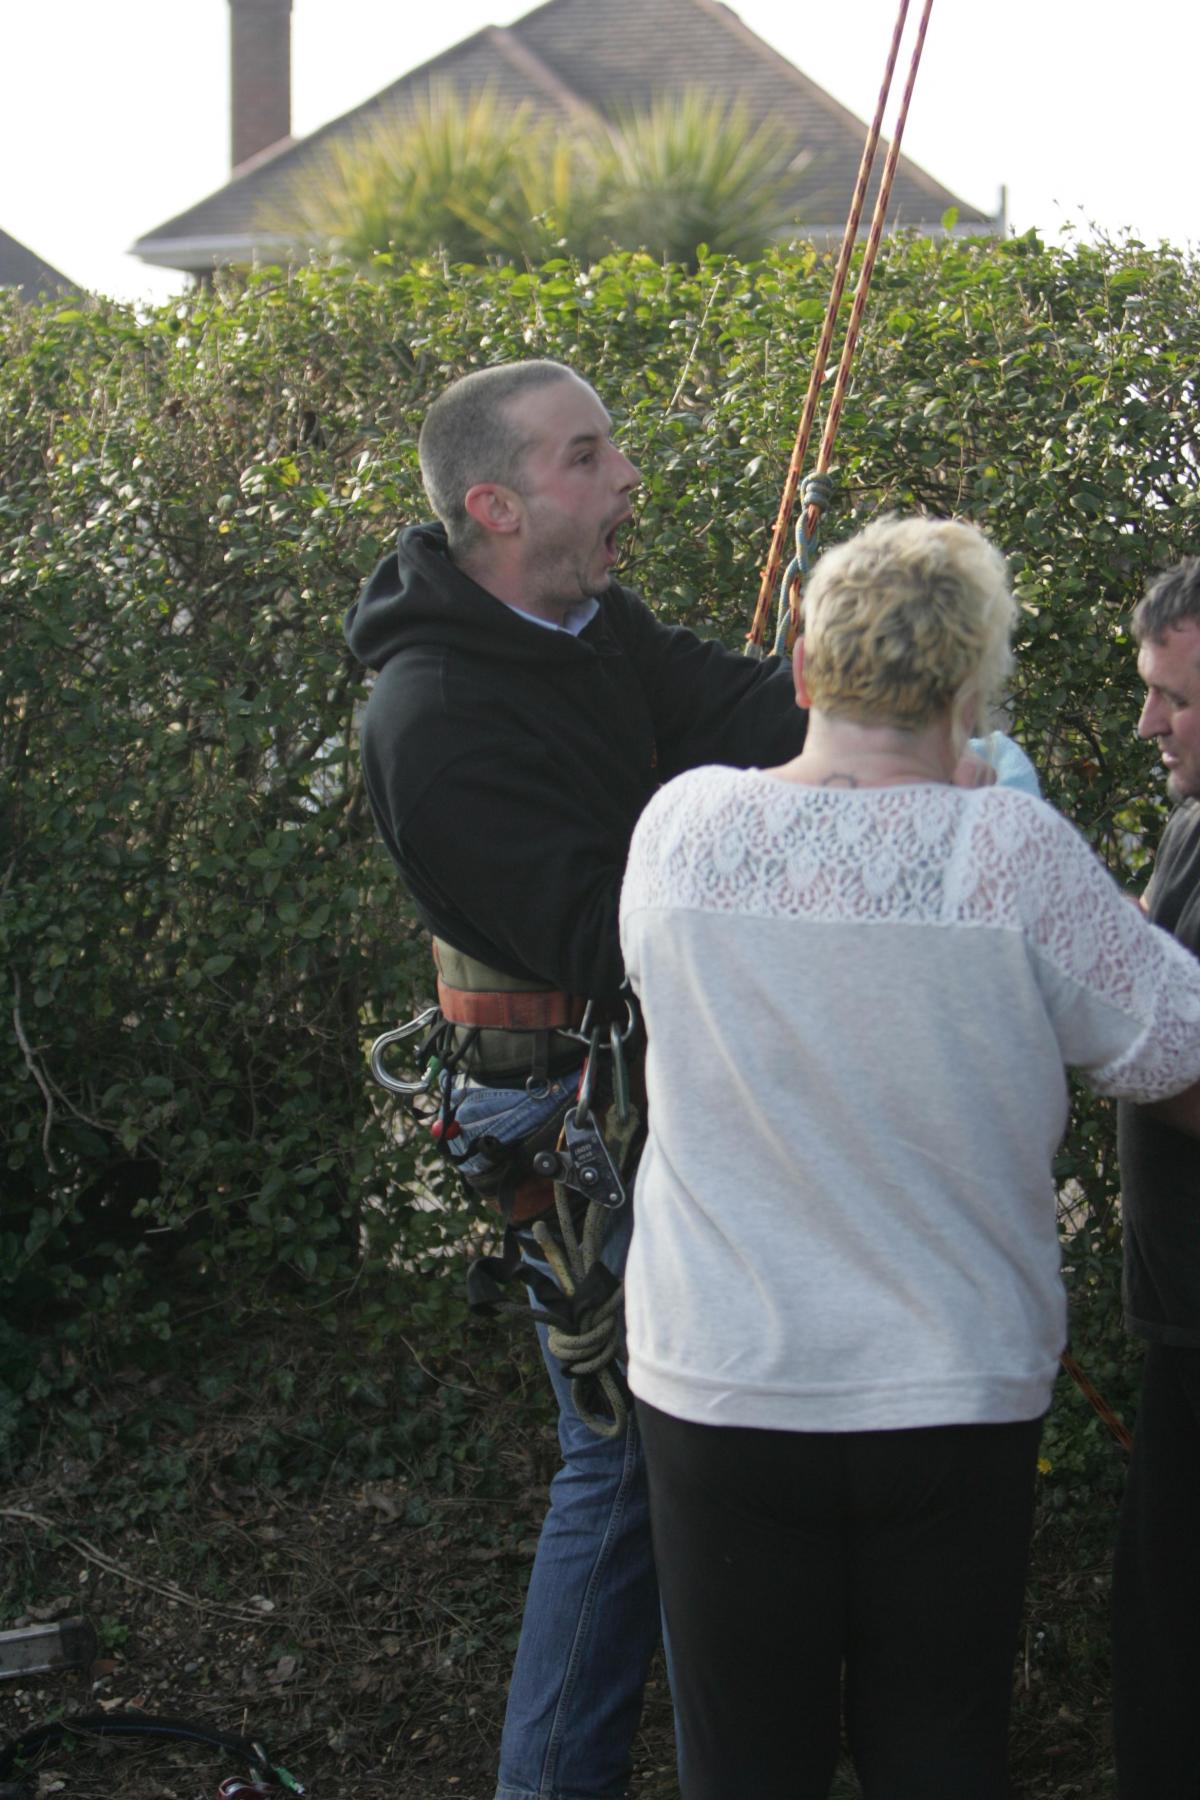 Full coverage of how Gonzo the parrot was rescued after becoming stranded 40ft up a tree in Southampton